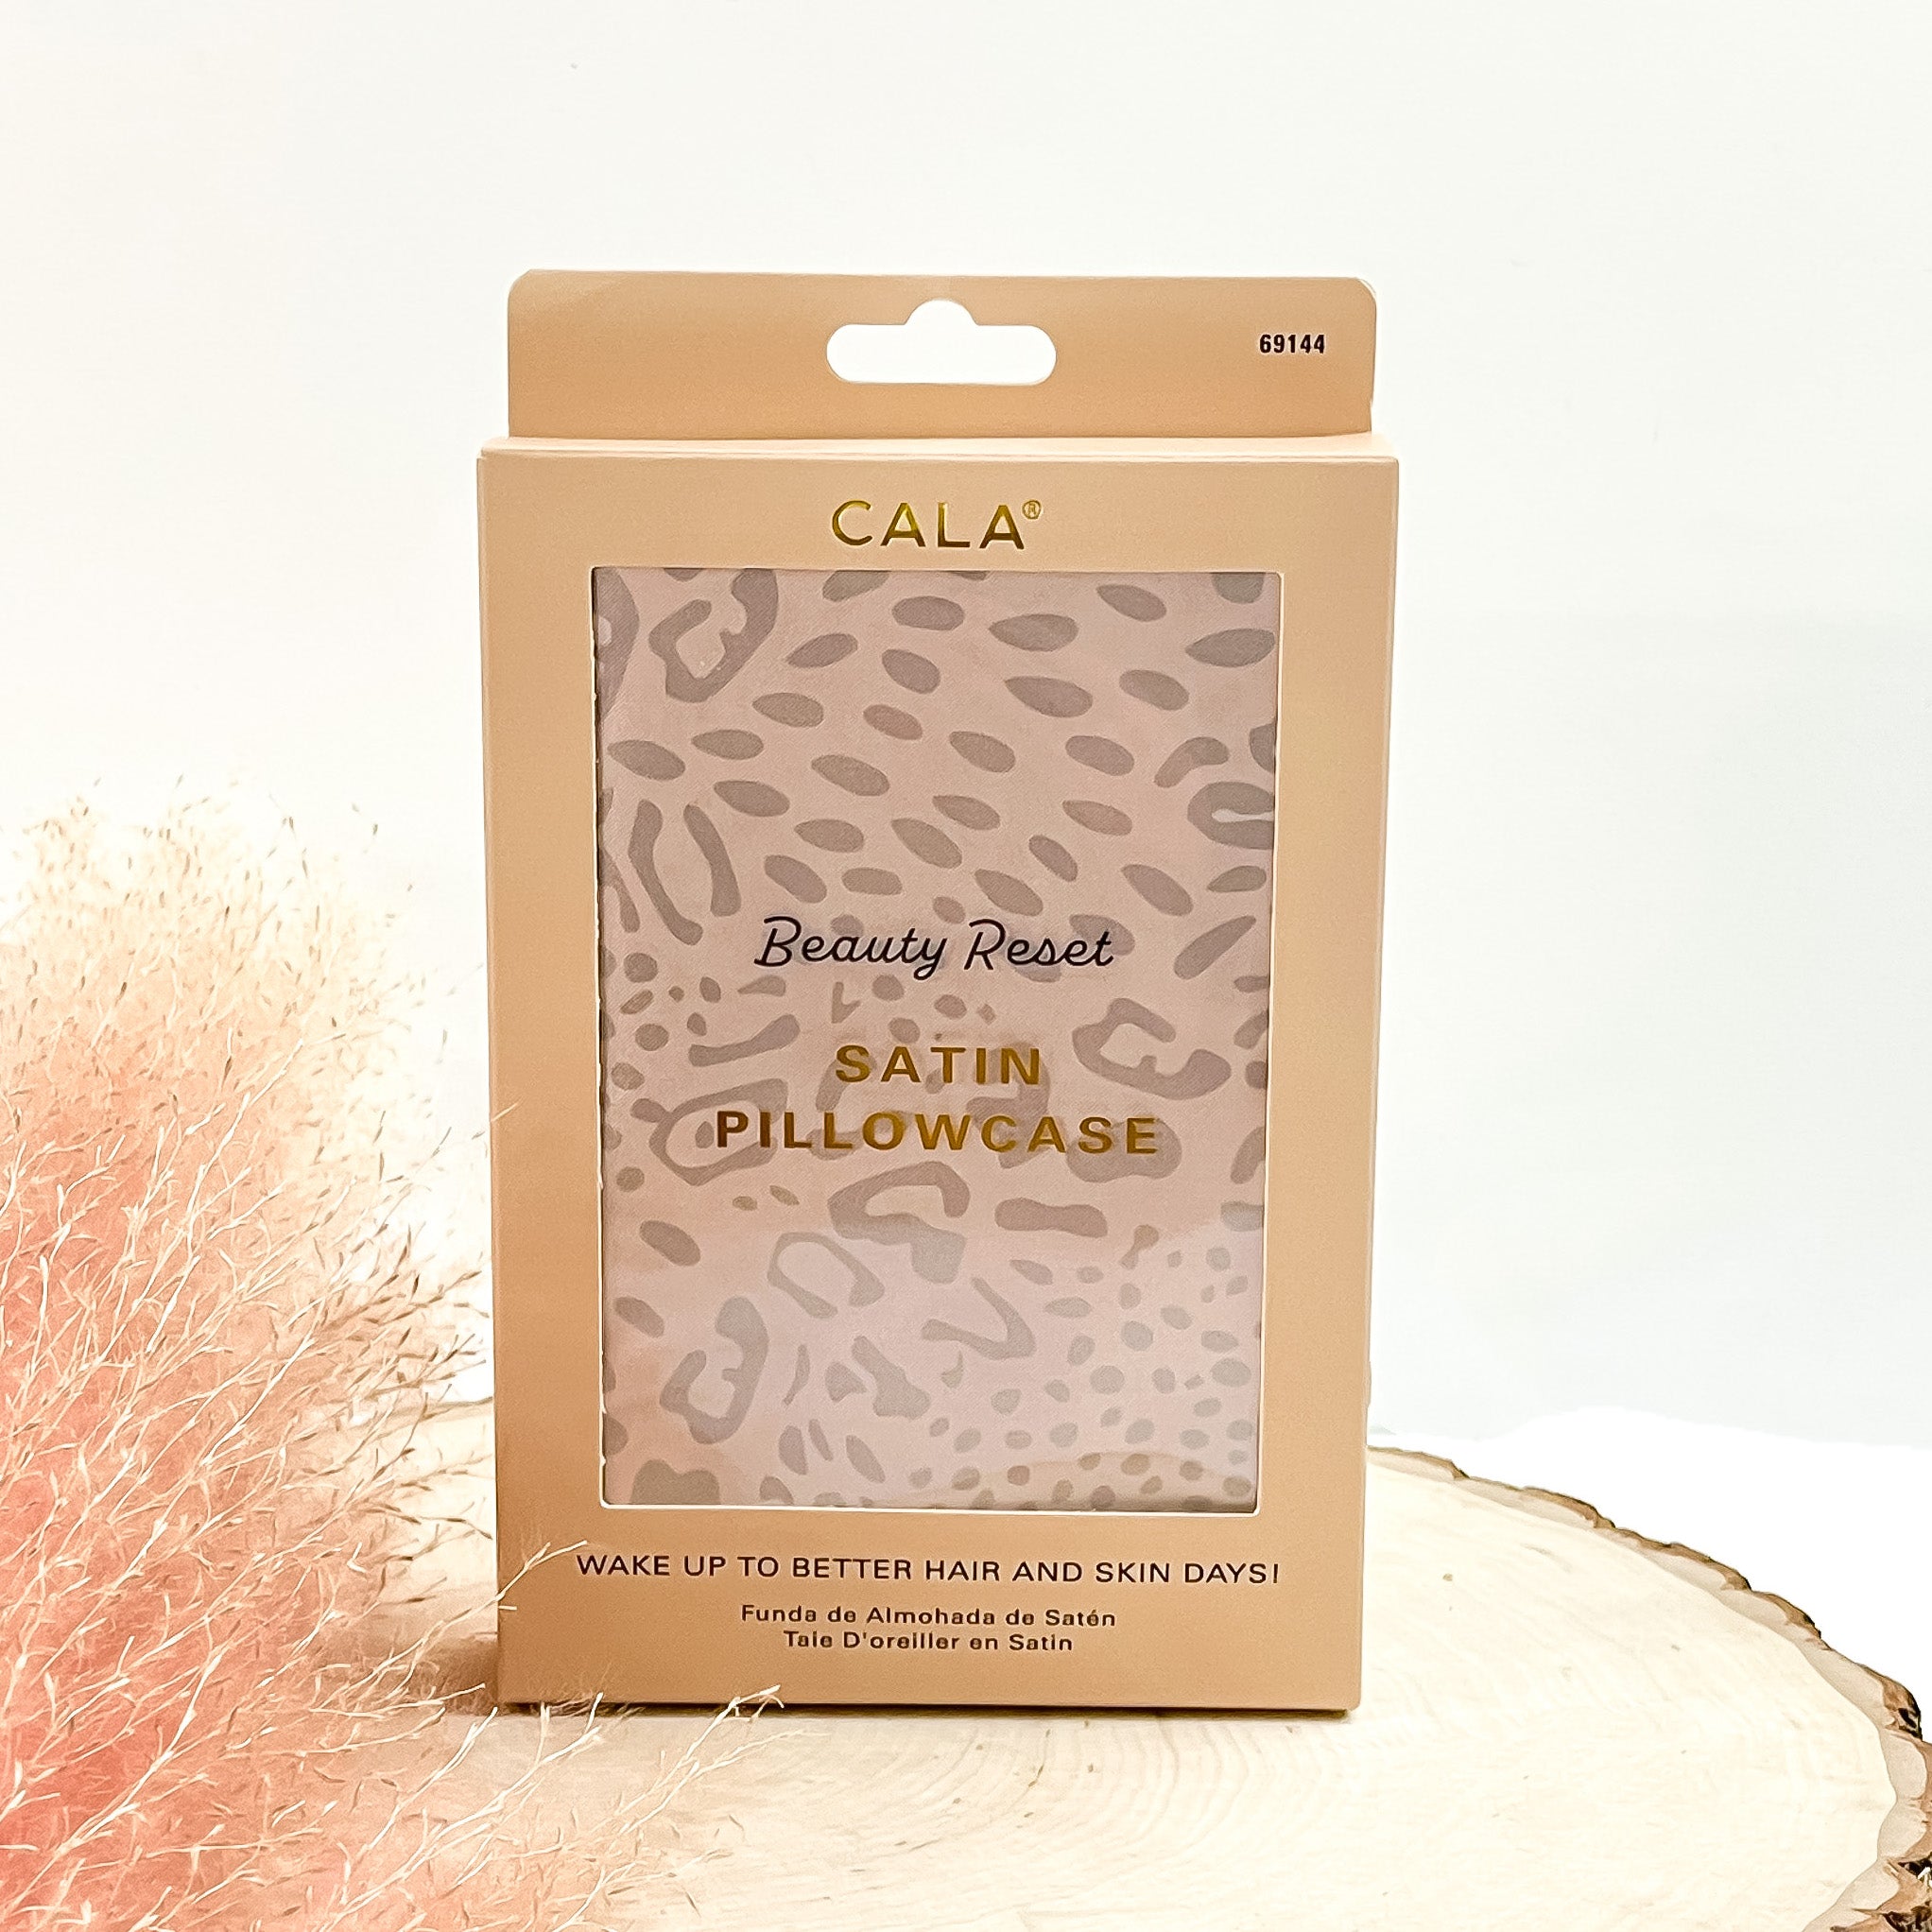 This is a cream colored box with a satin pillowcase inside in leopard print.